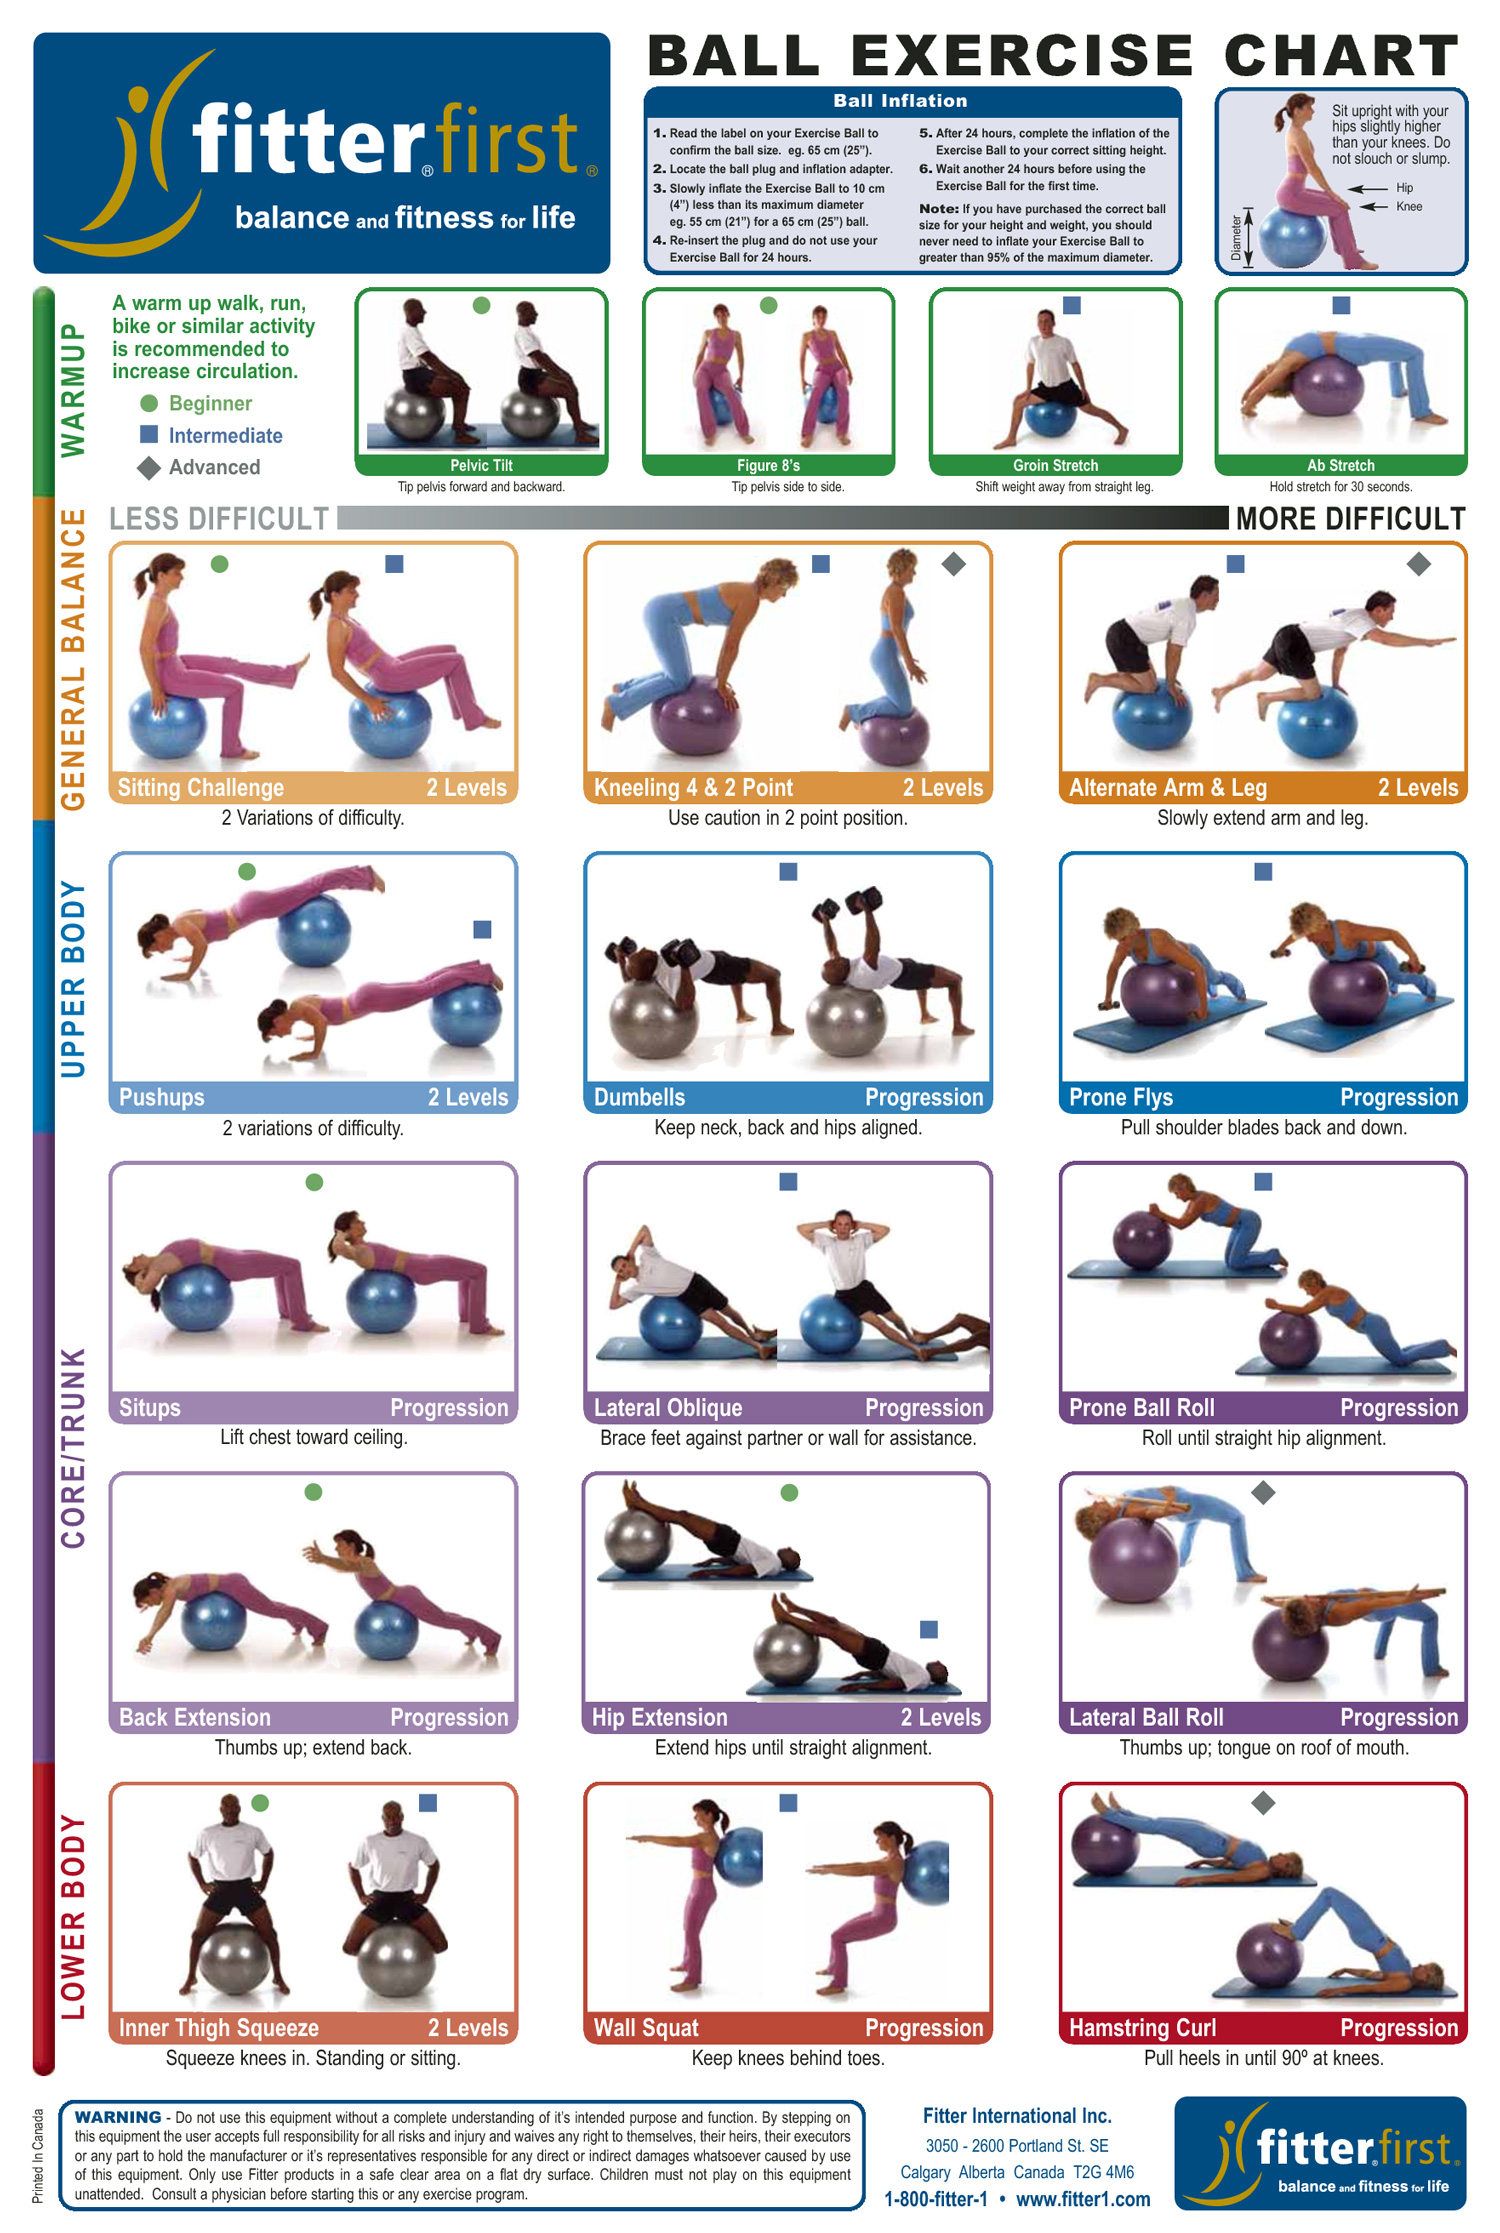 Ball Exercise Plan Infographic